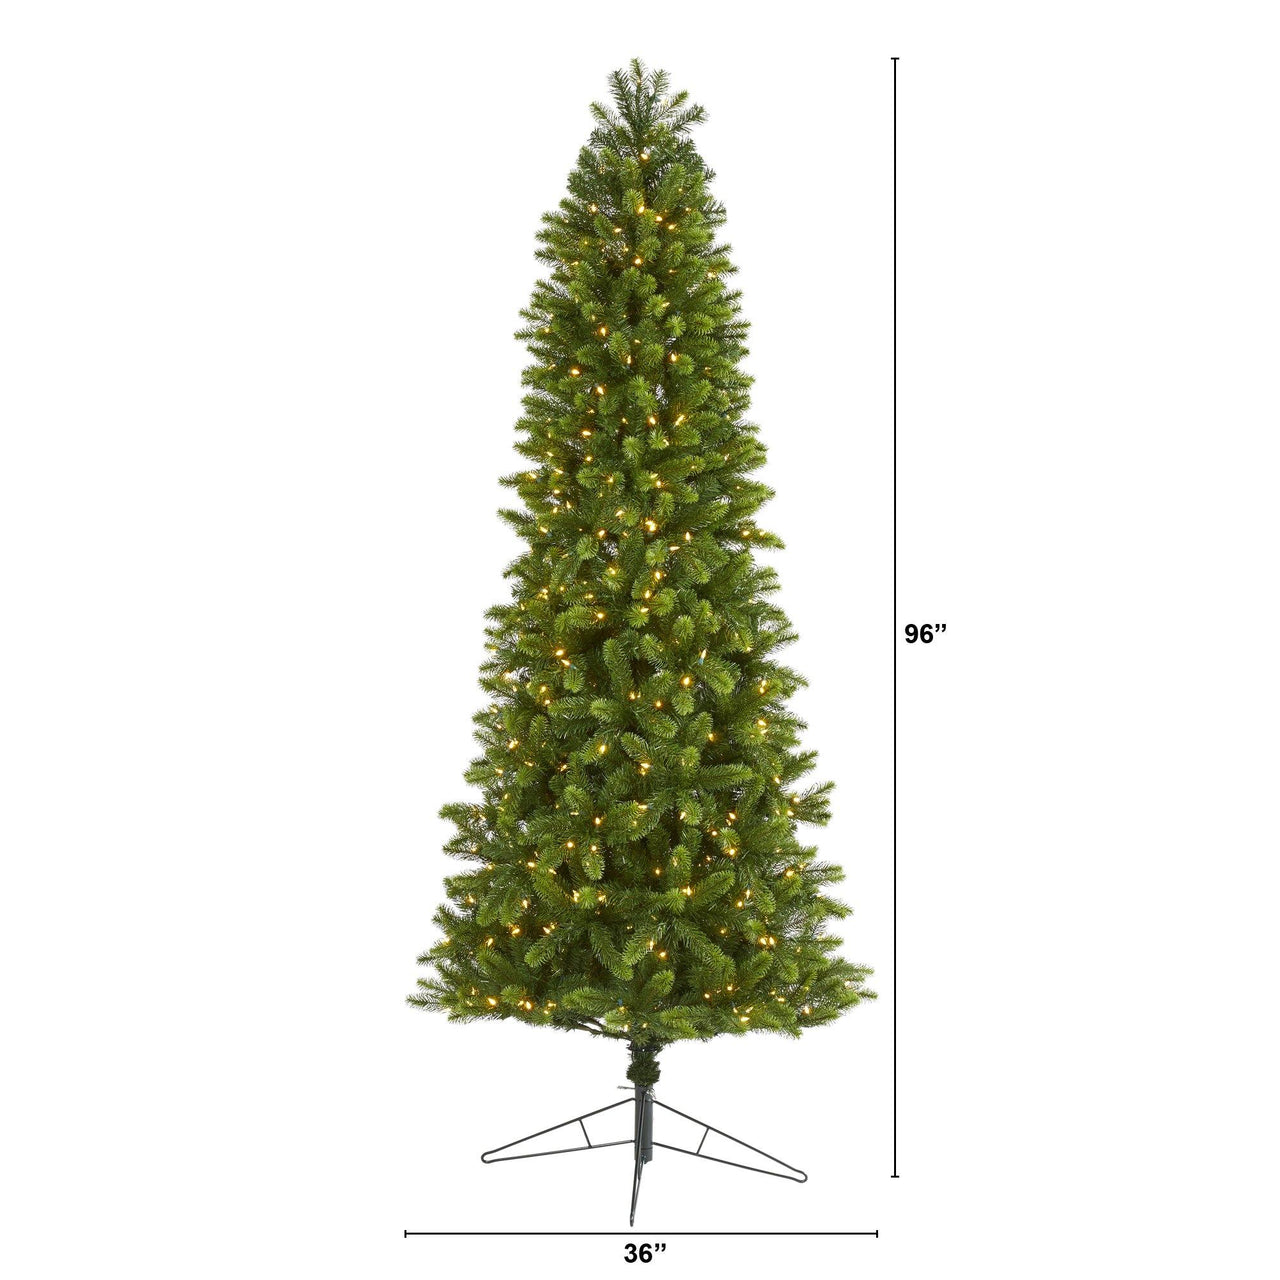 8' Slim Virginia Spruce Artificial Christmas Tree with 600 Warm White (Multifunction) LED Lights with Instant Connect Technology and 1294 Bendable Branches - The Fox Decor